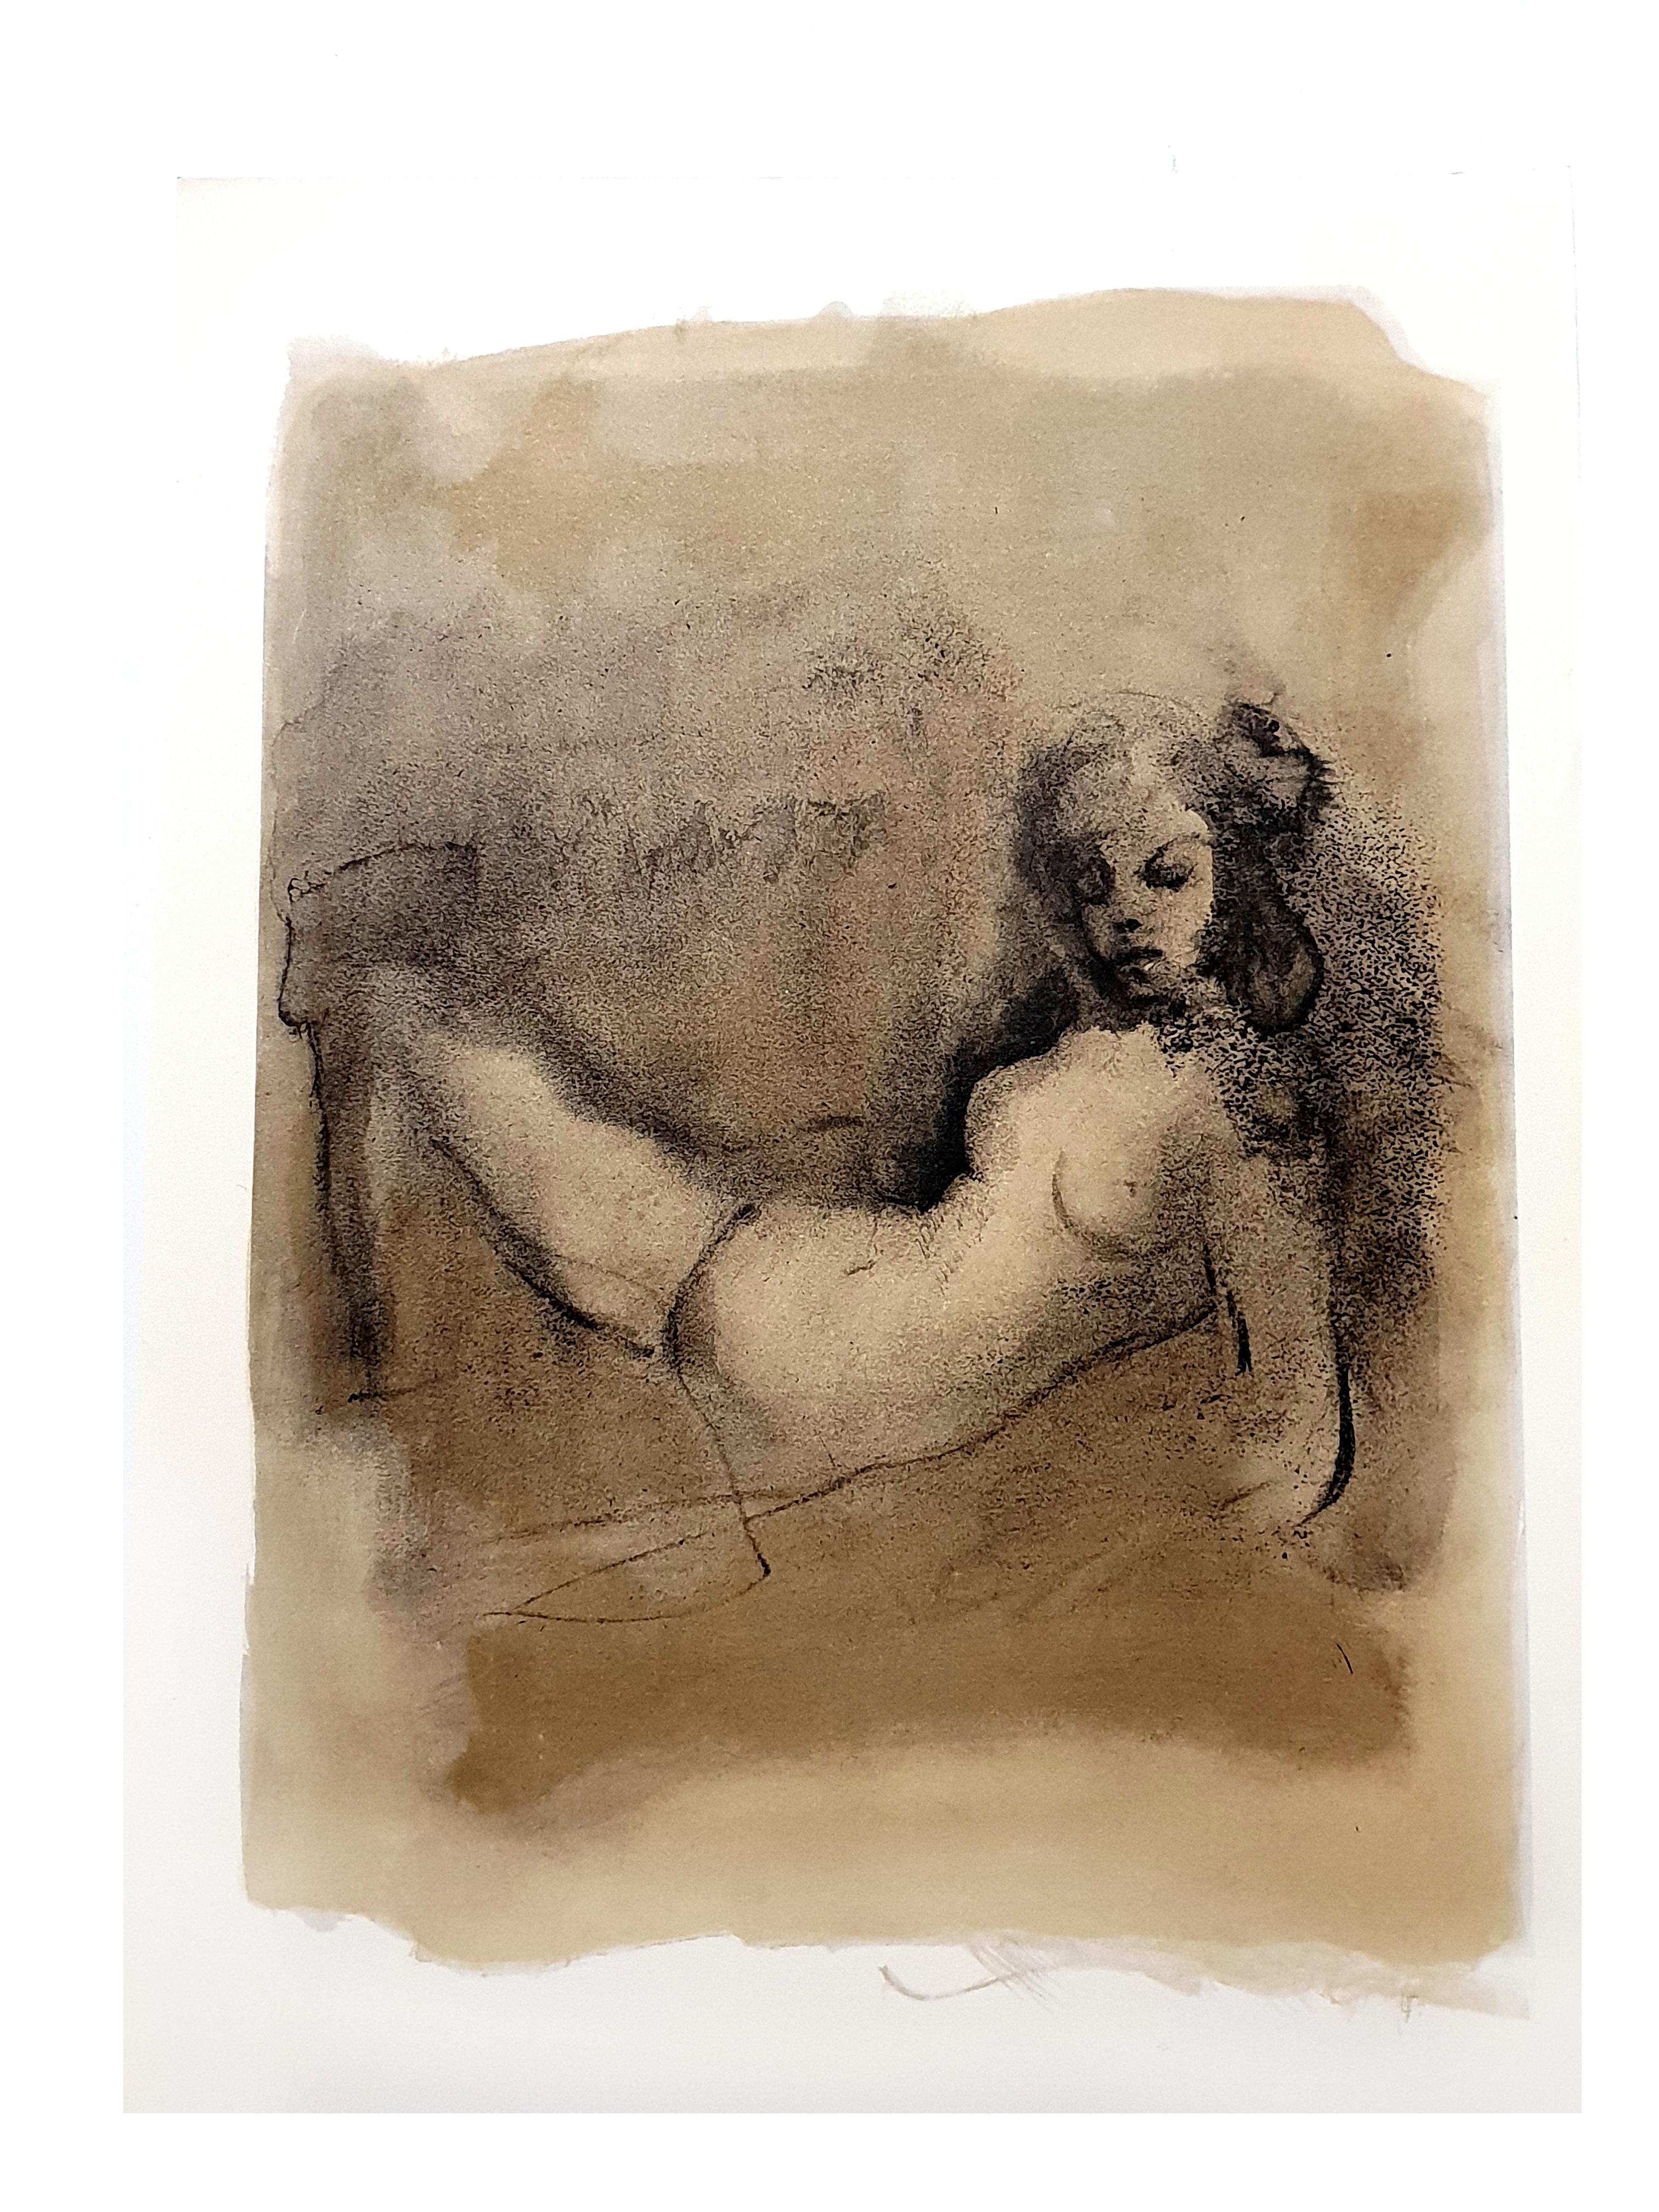 Leonor Fini - Thinking - Original Lithograph
The Flowers of Evil
1964
Conditions: excellent
Edition: 500 
Dimensions: 46 x 34 cm 
Editions: Le Cercle du Livre Précieux, Paris
Unsigned and unumbered as issued